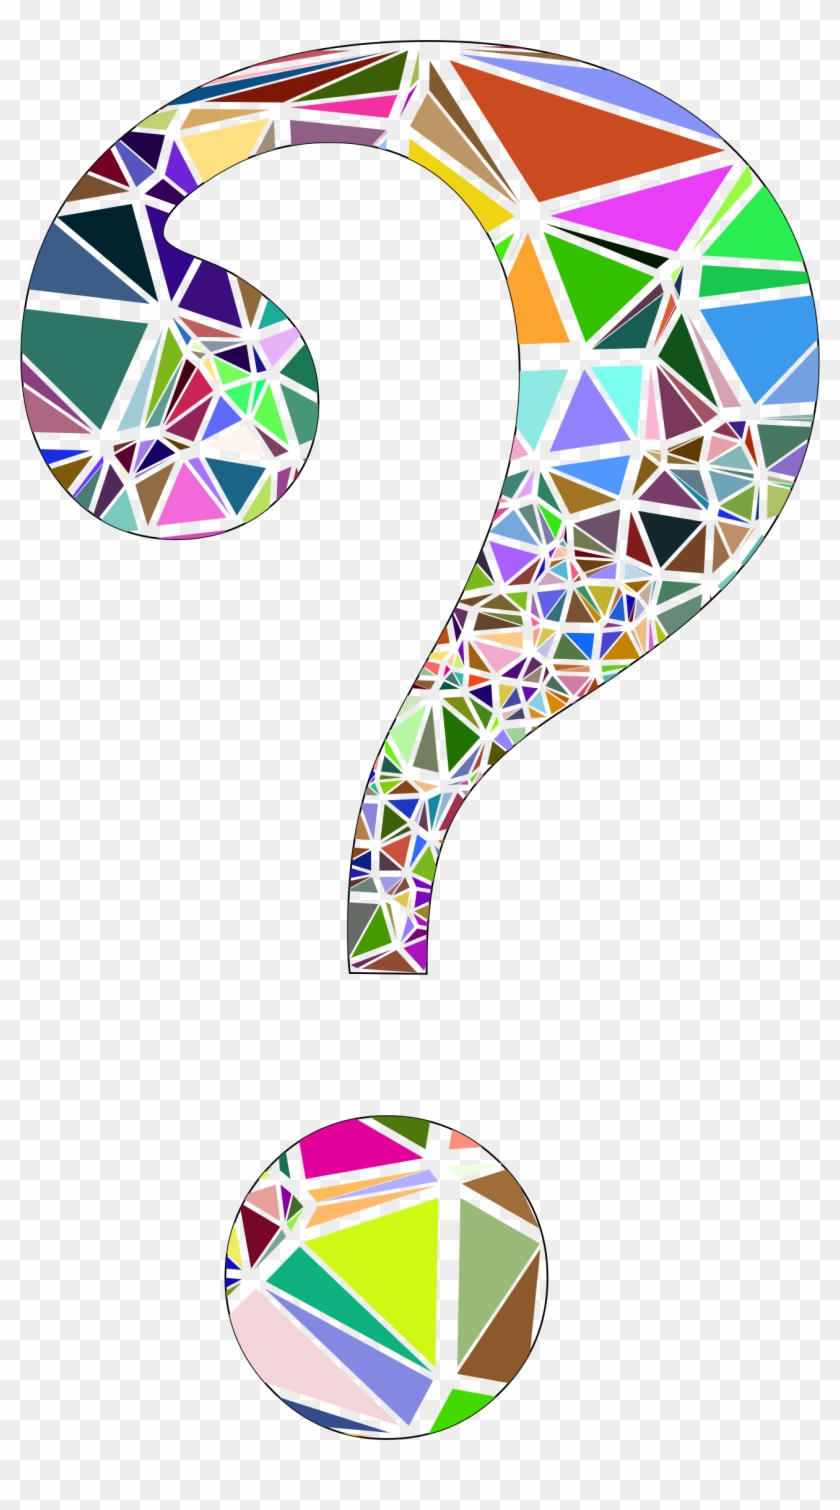 This Free Icons Png Design Of Low Poly Shattered Question - Low Poly Question Mark Clipart #3277495